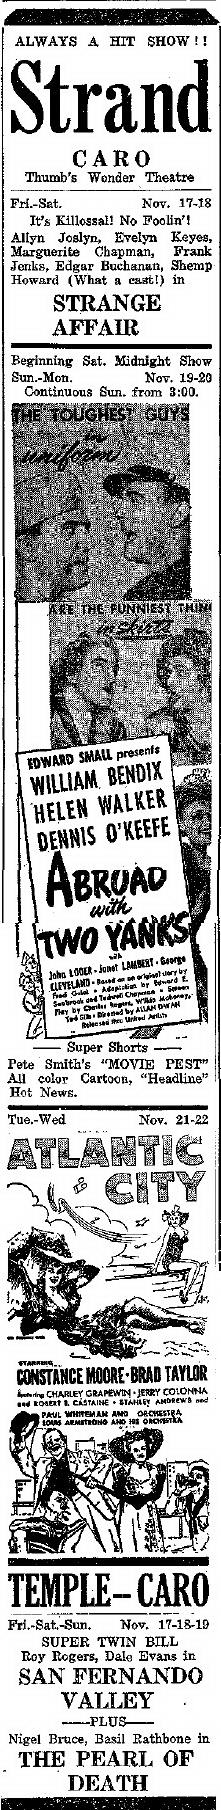 Strand Theatre - NOV 17 1944 STRAND AND TEMPLE GOING HEAD TO HEAD